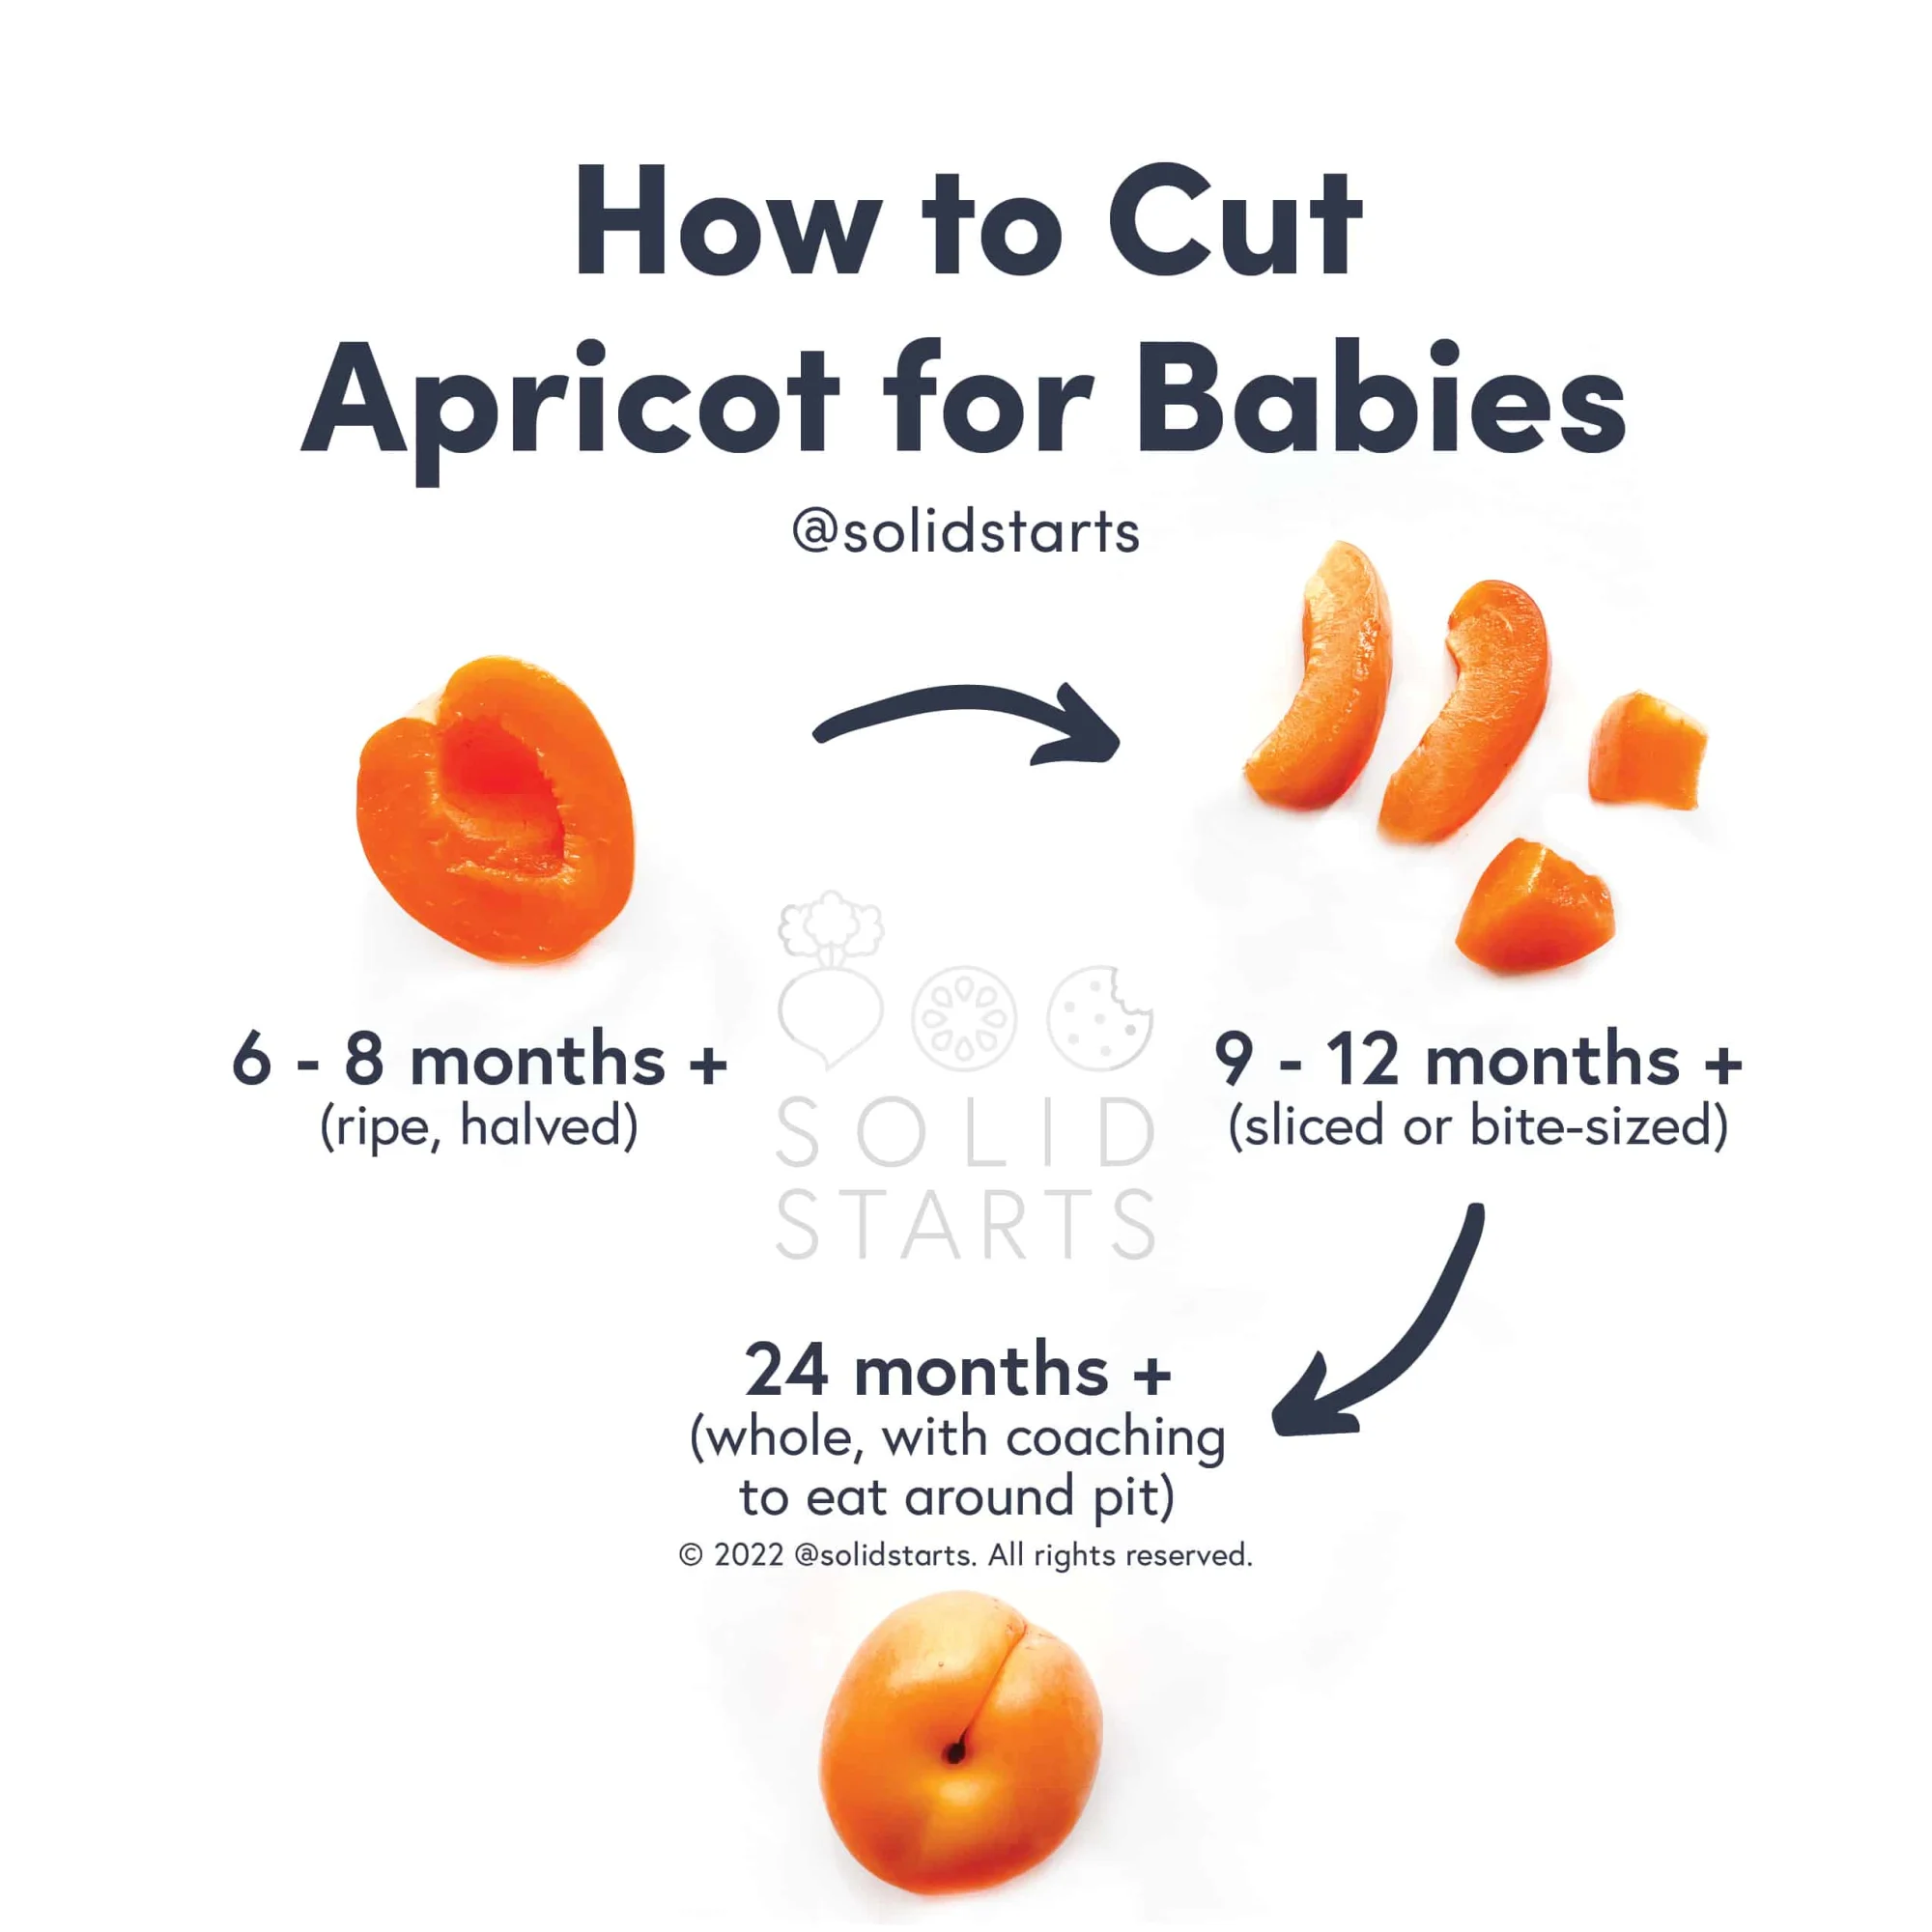 Apricots for Babies - First Foods for Baby - Solid Starts